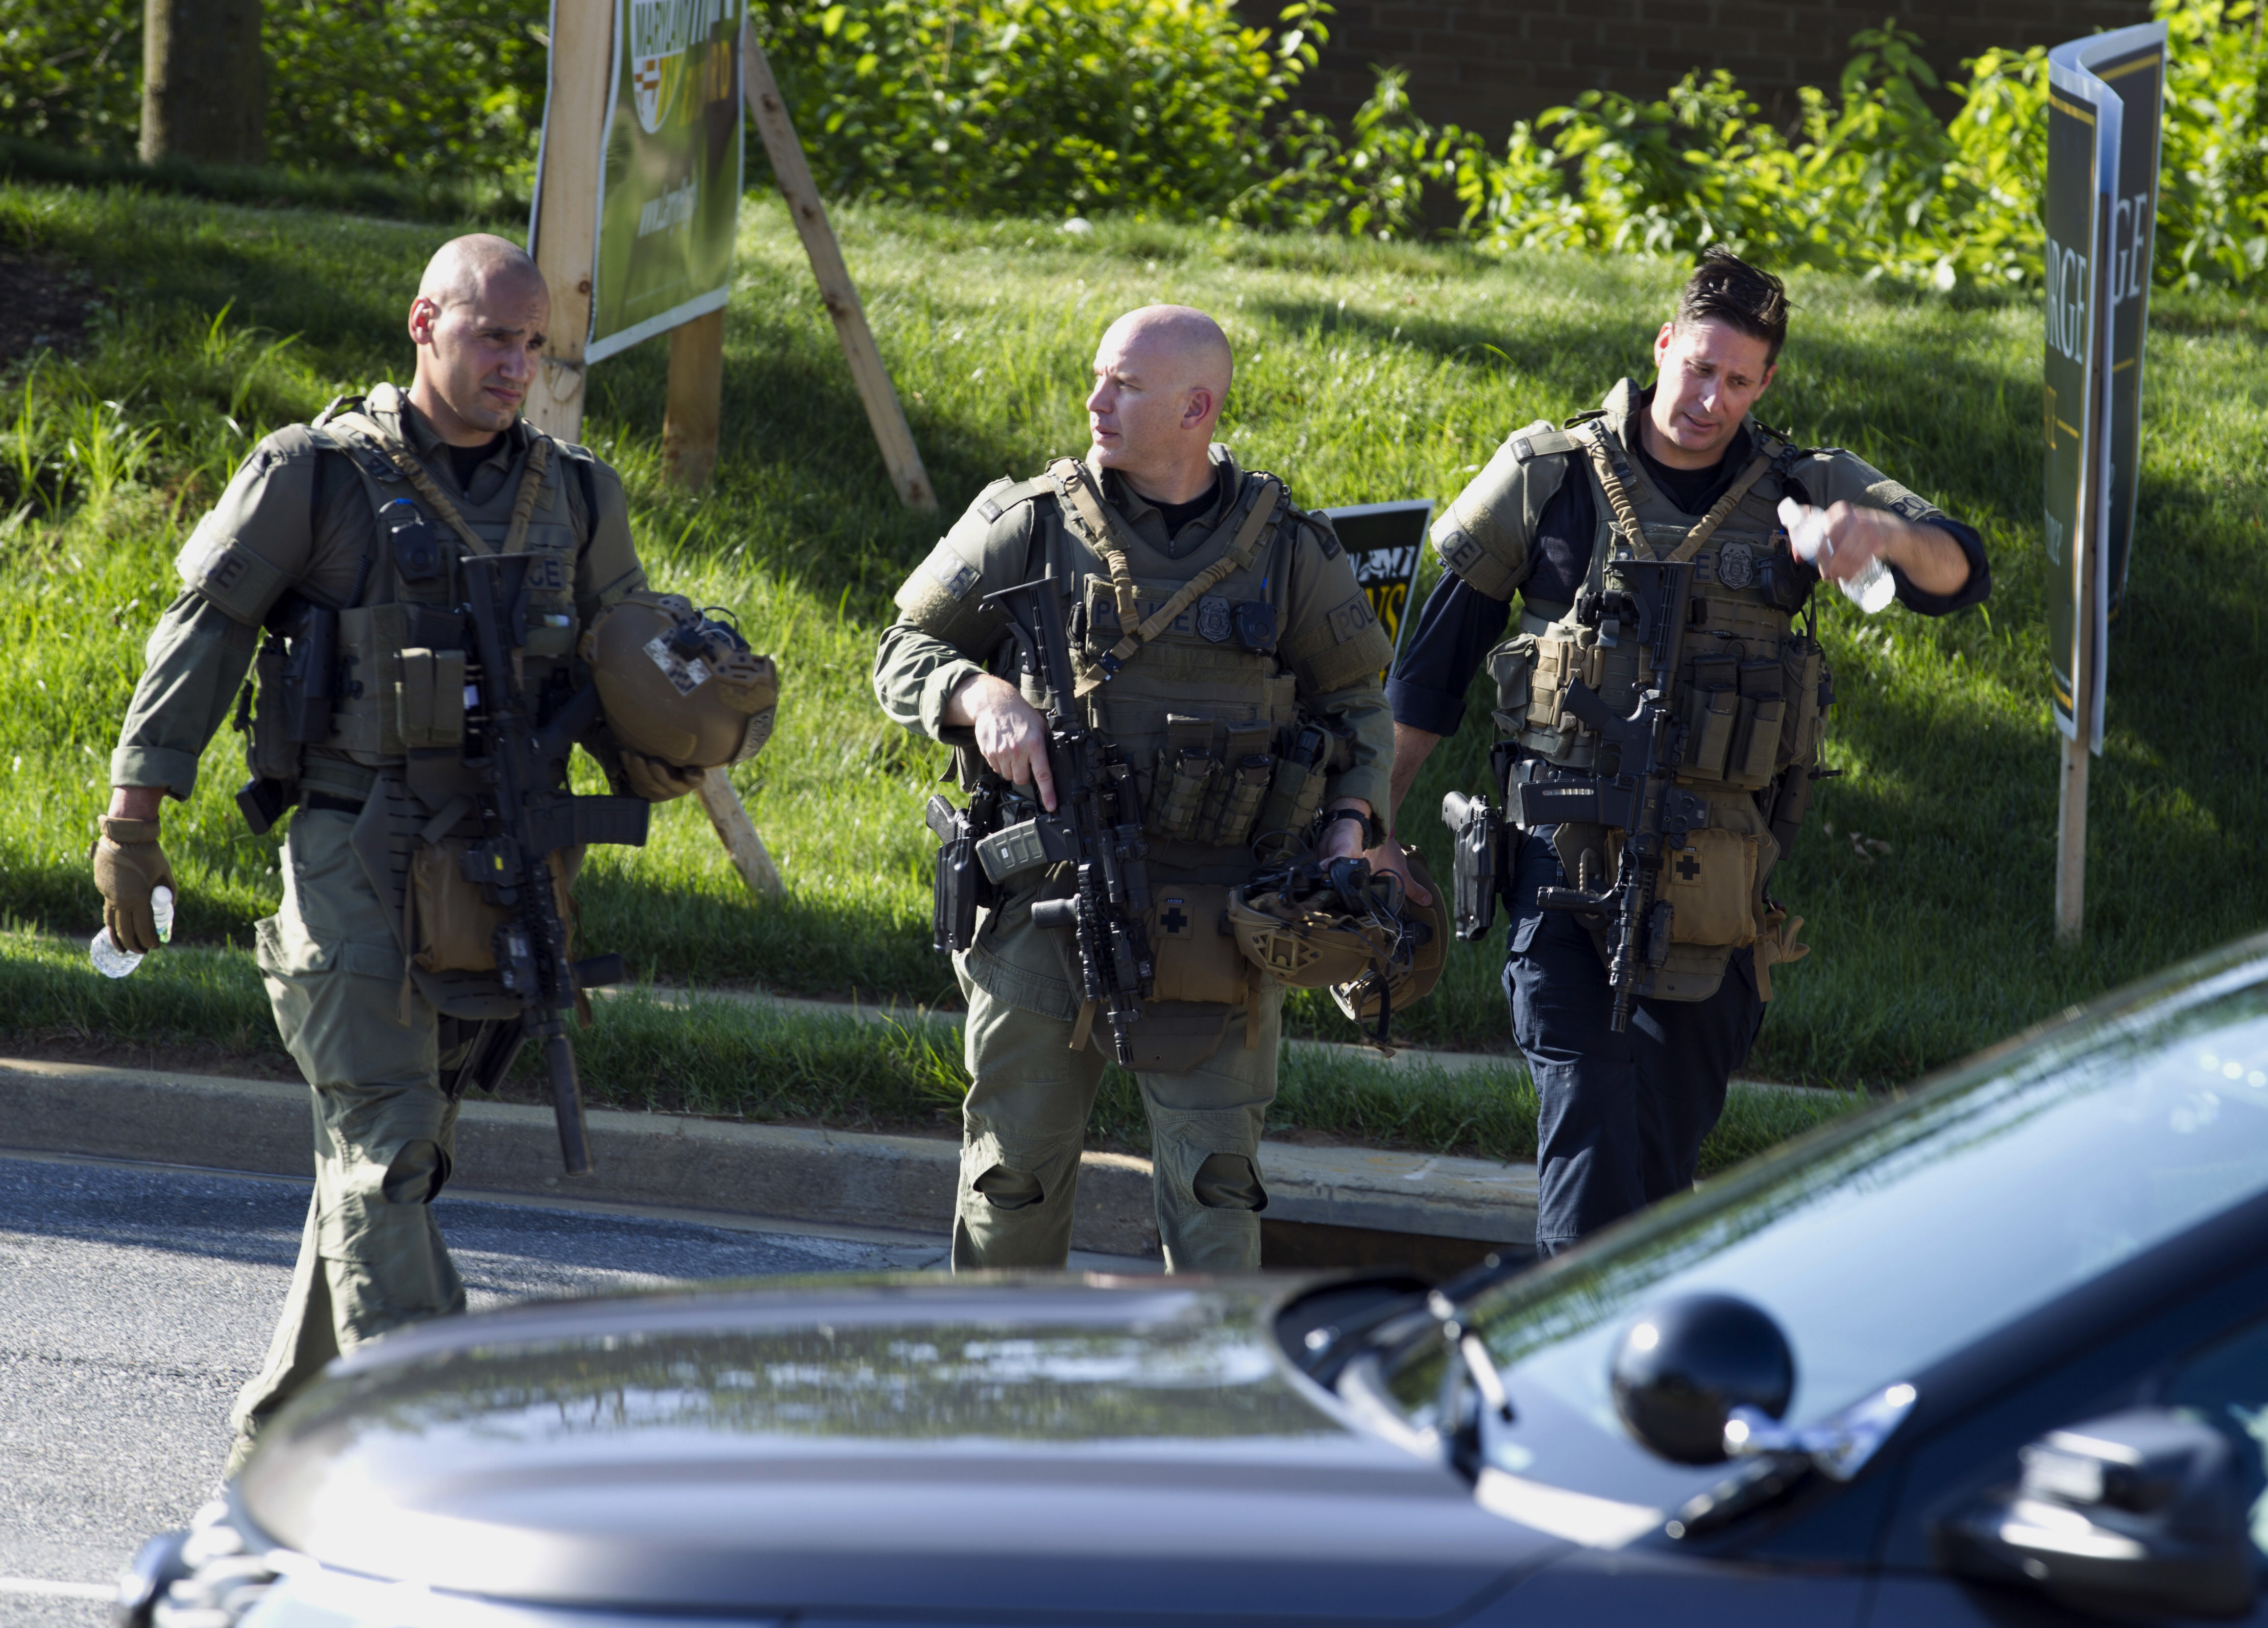 Maryland police officers at the scene